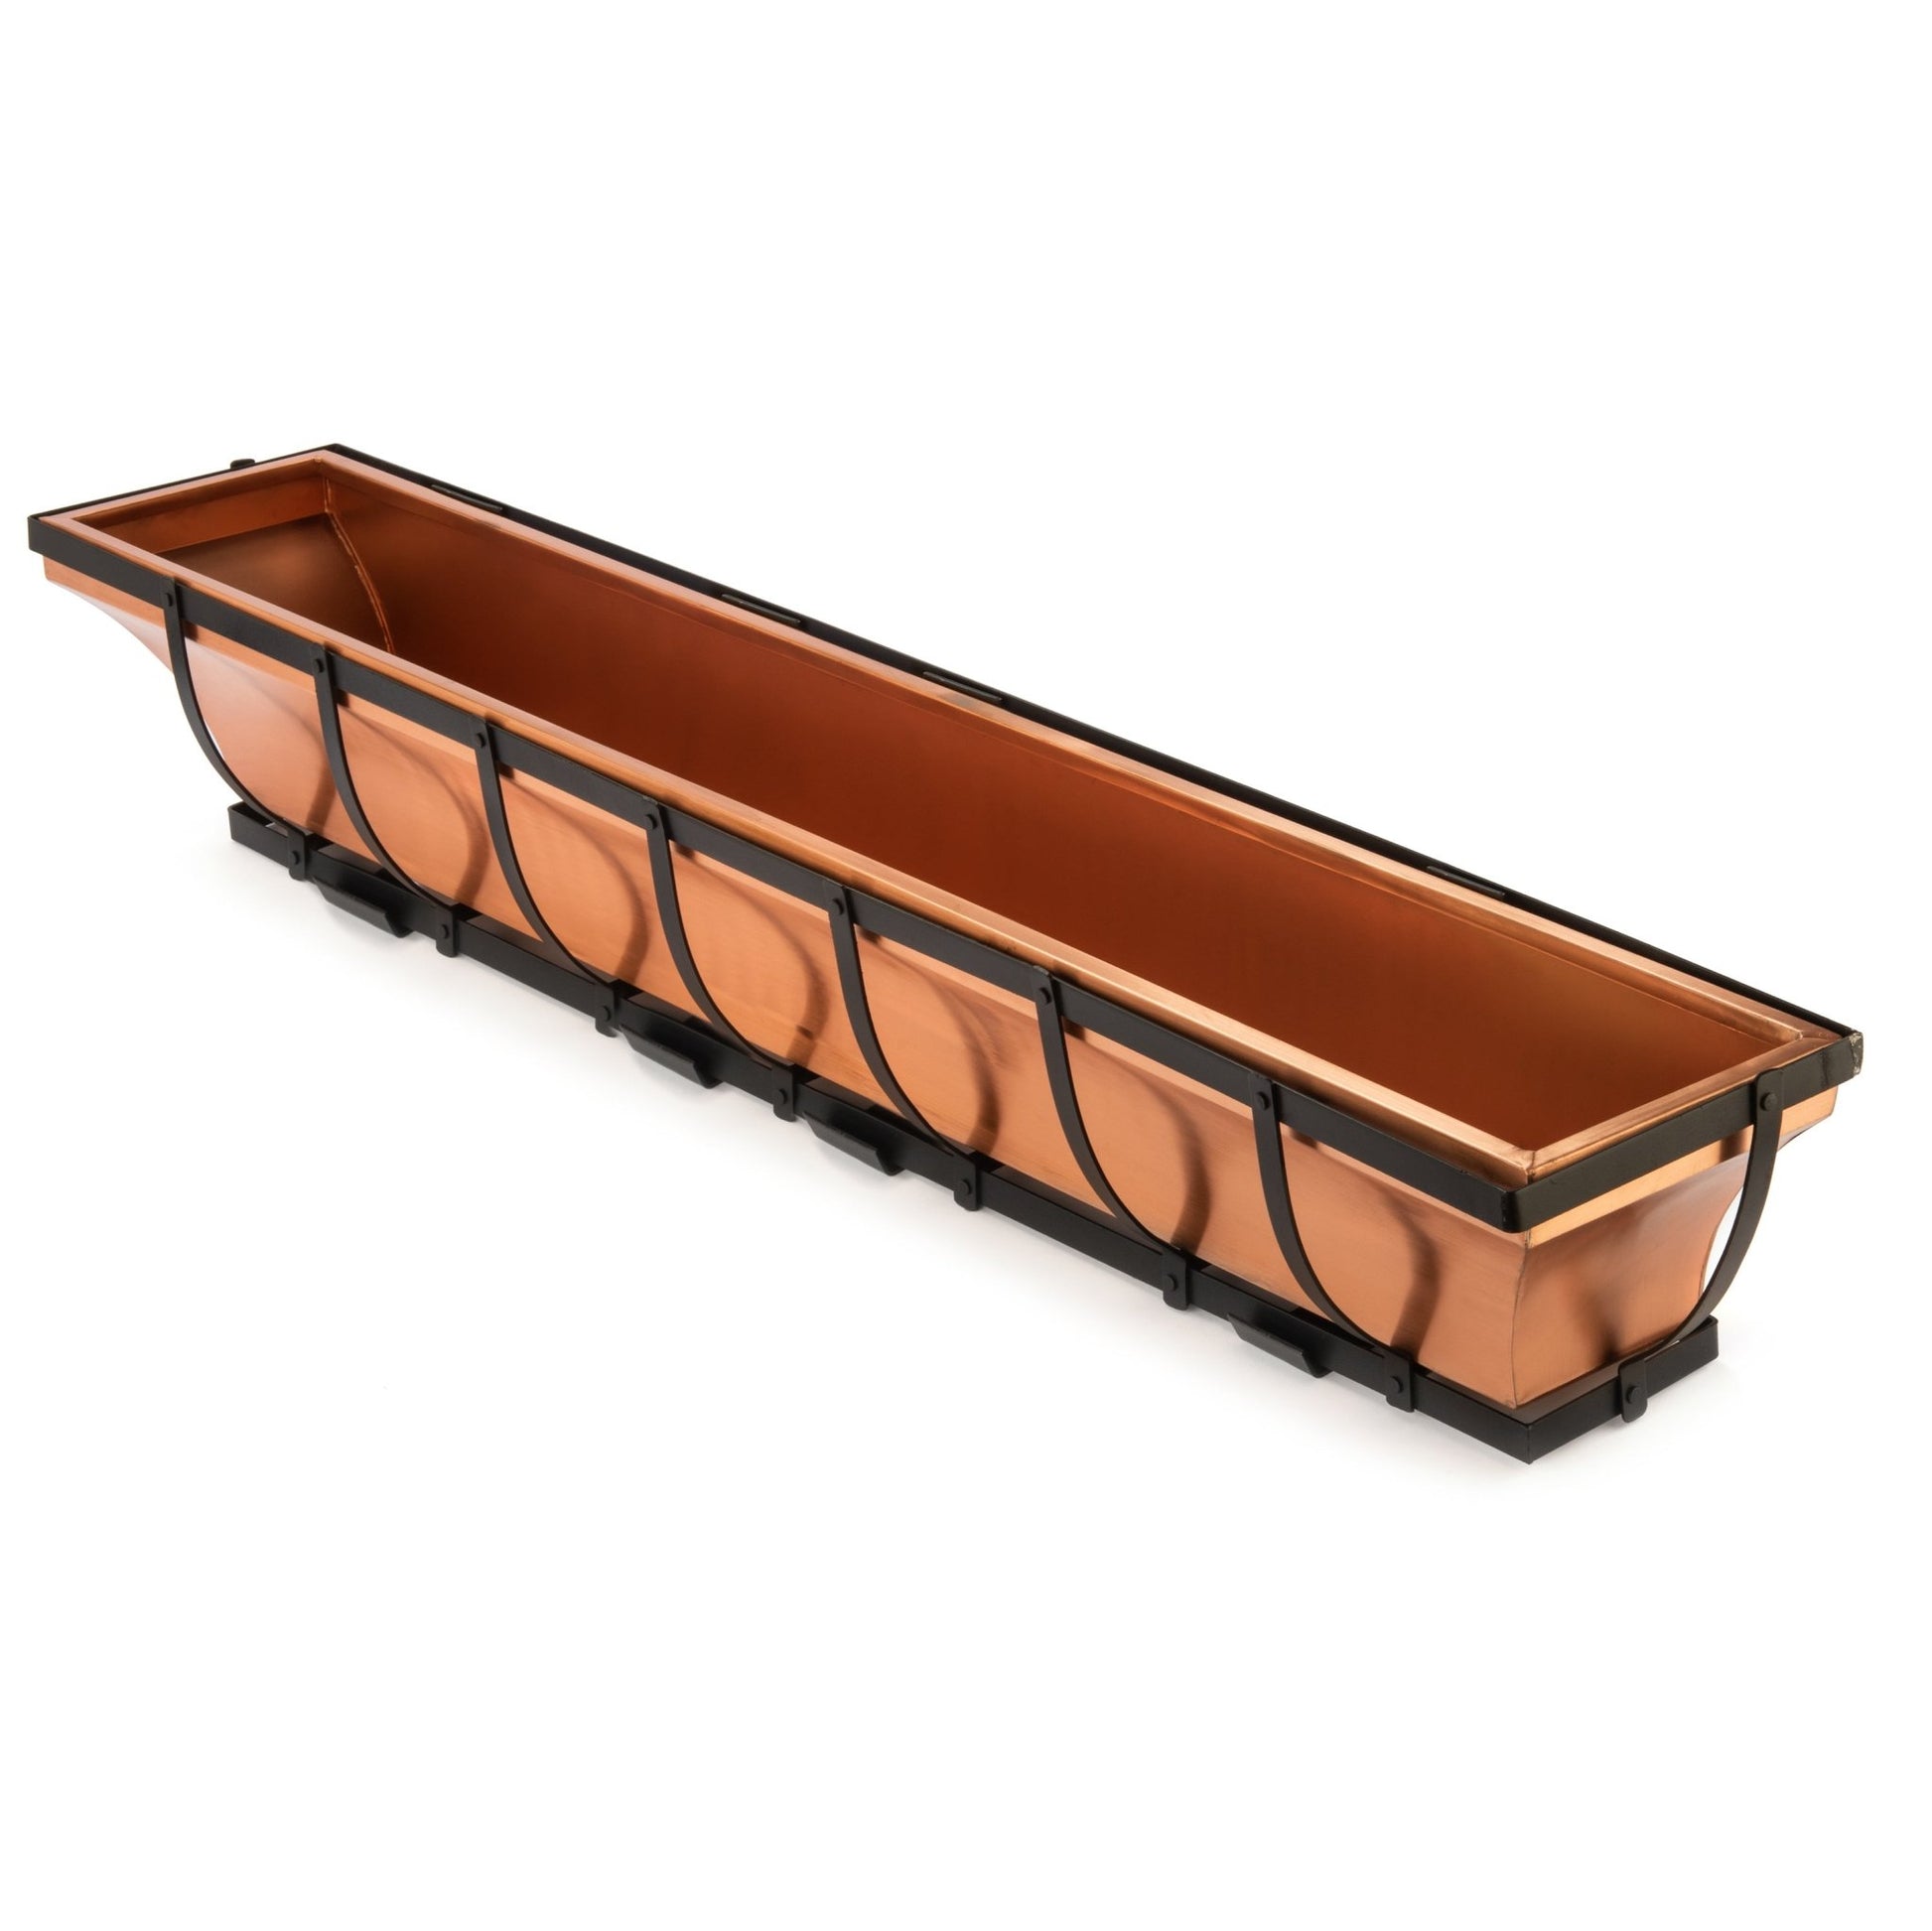 H Potter Copper Window Box with Metal Frame 48 inch